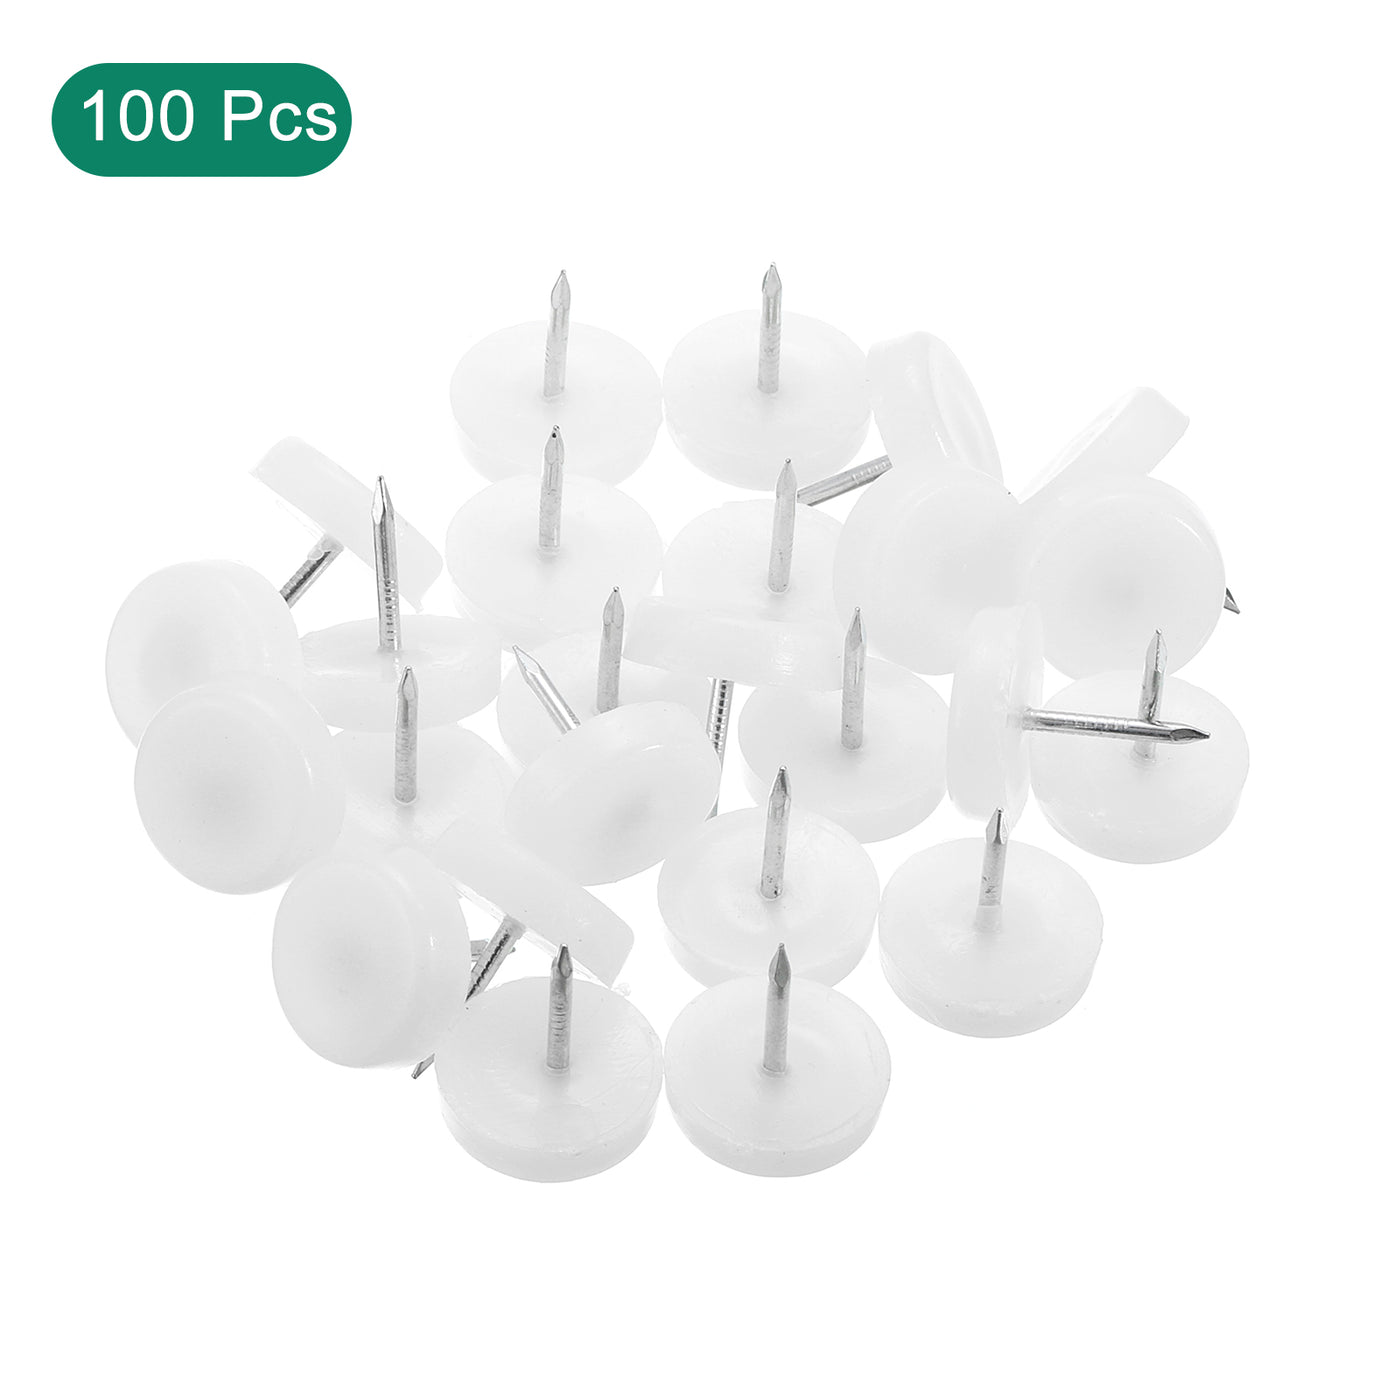 uxcell Uxcell Nail on Furniture Glides, 100pcs 19mm Plastic Furniture Feet Sliders, White